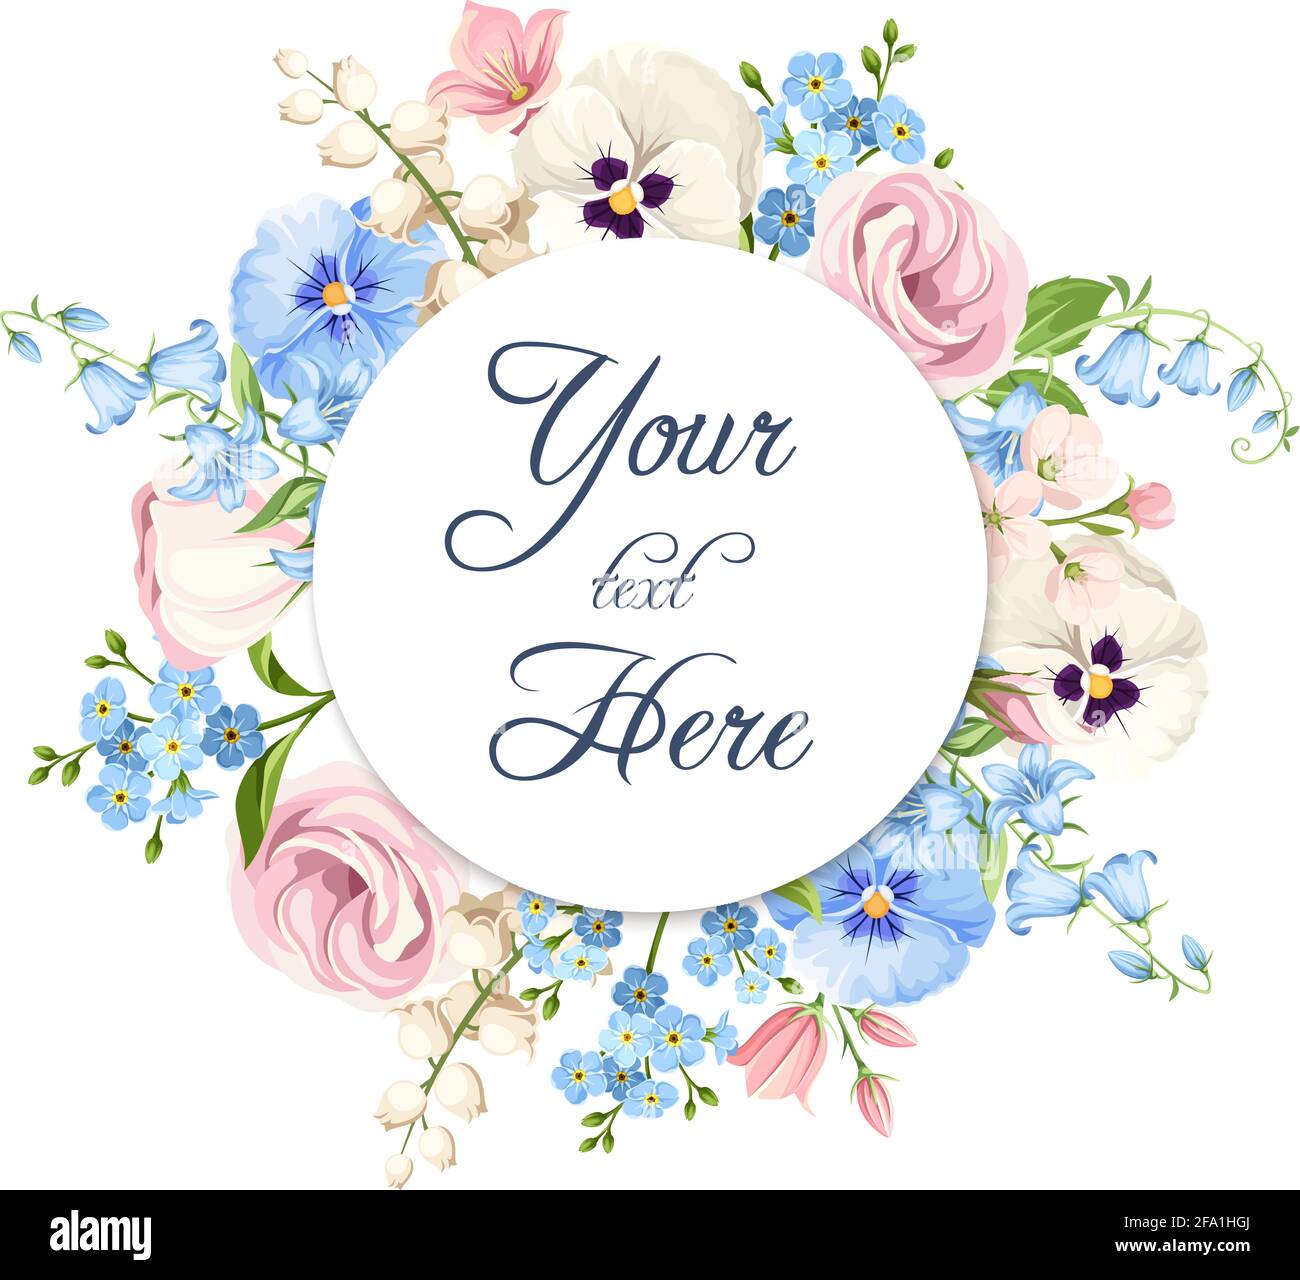 Vector invitation or greeting circle card with pink, blue and white pansy flowers, lisianthus flowers and forget-me-not flowers. Stock Vector